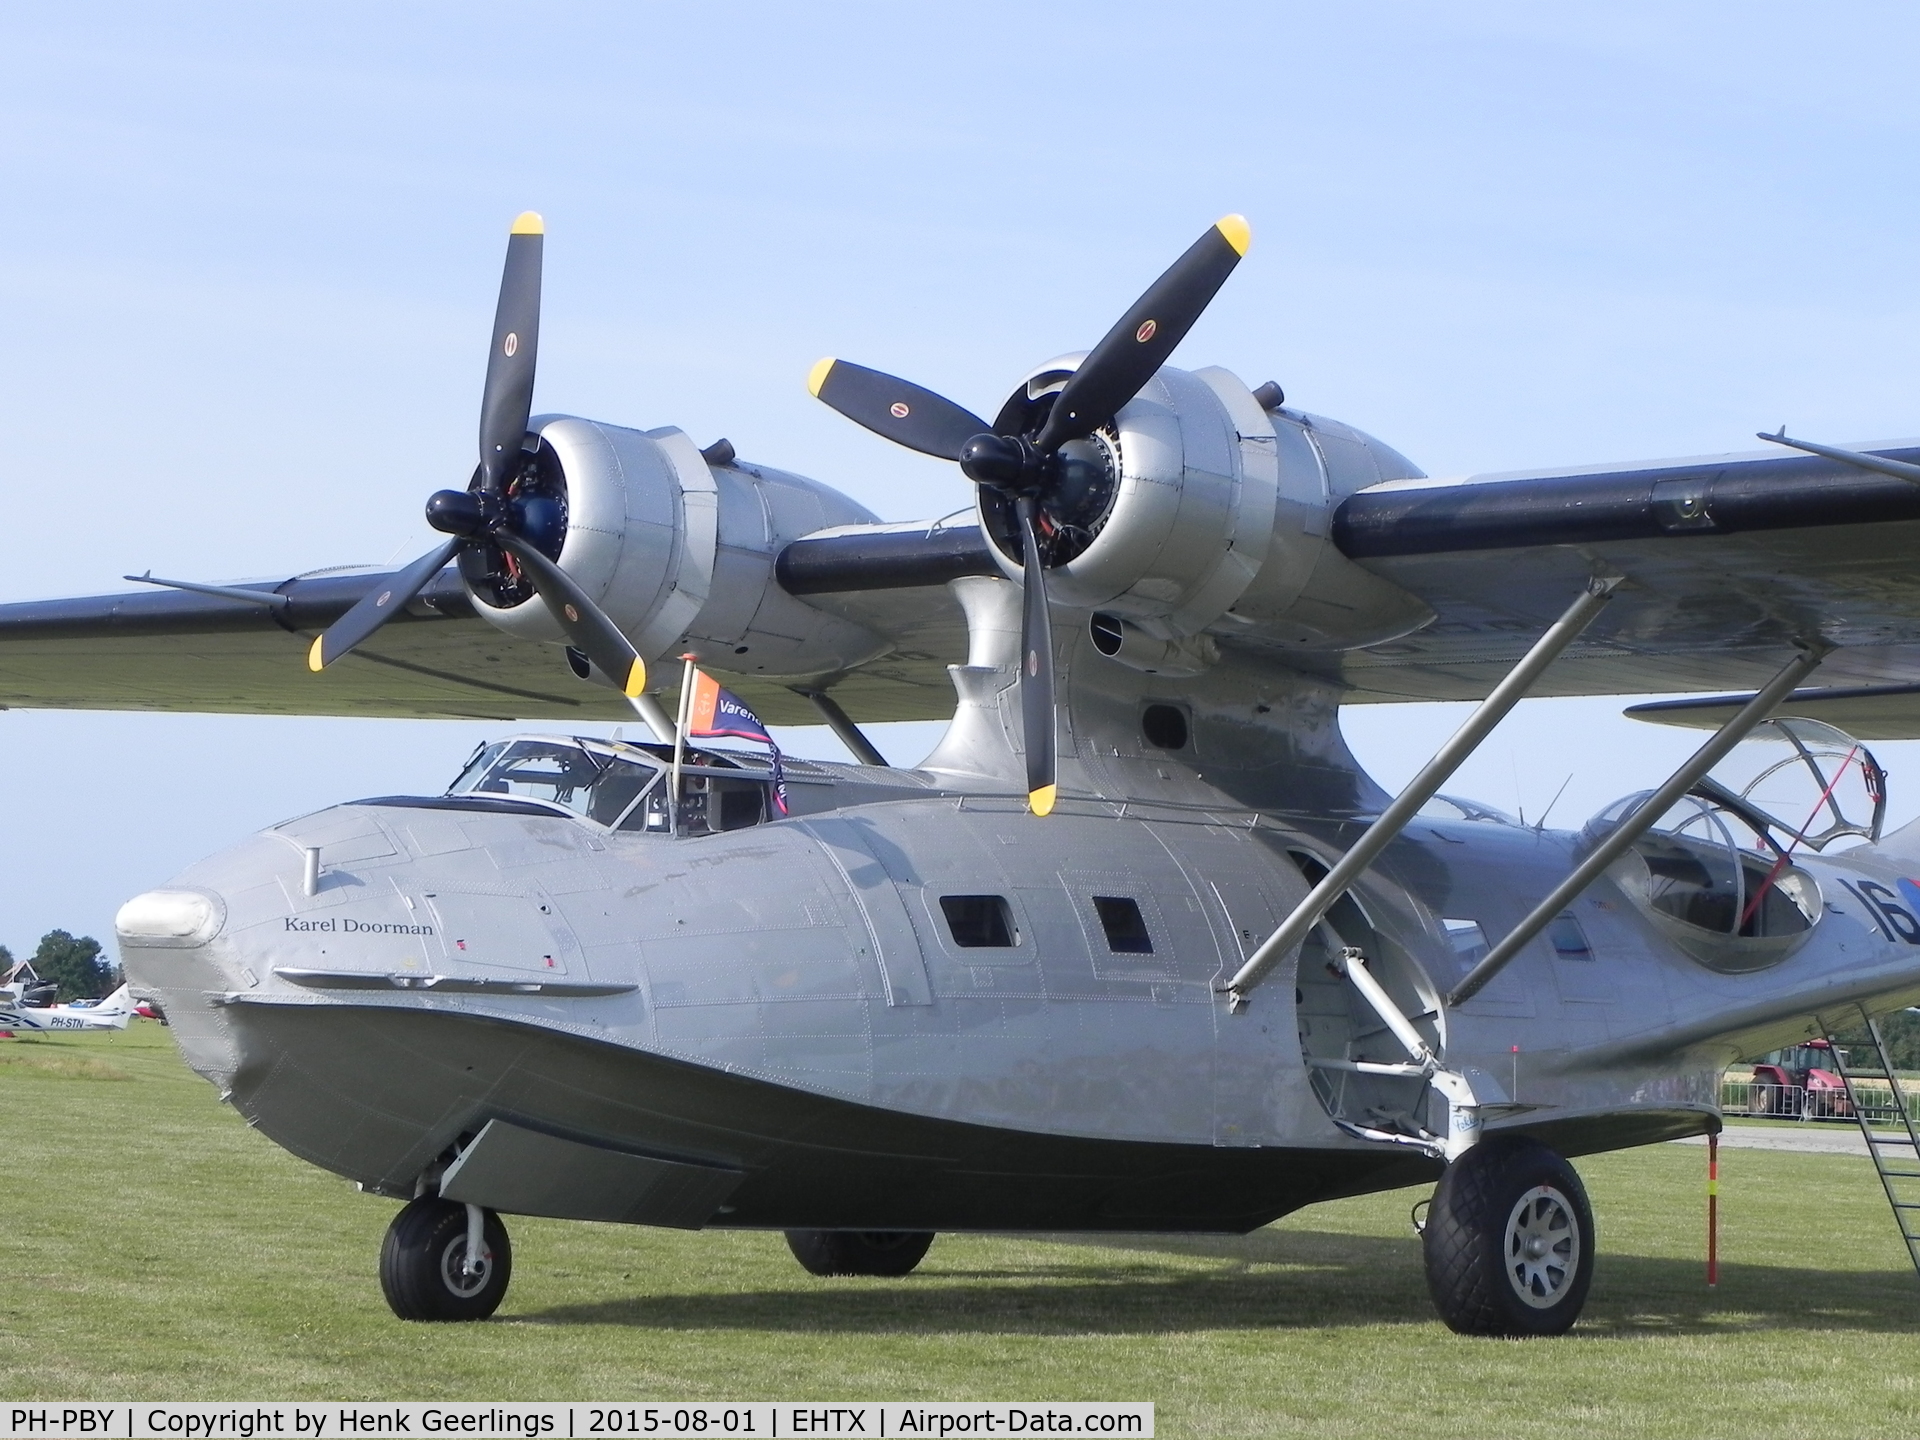 PH-PBY, 1941 Consolidated PBY-5A Catalina C/N 300, Texel Airshow , August 2015